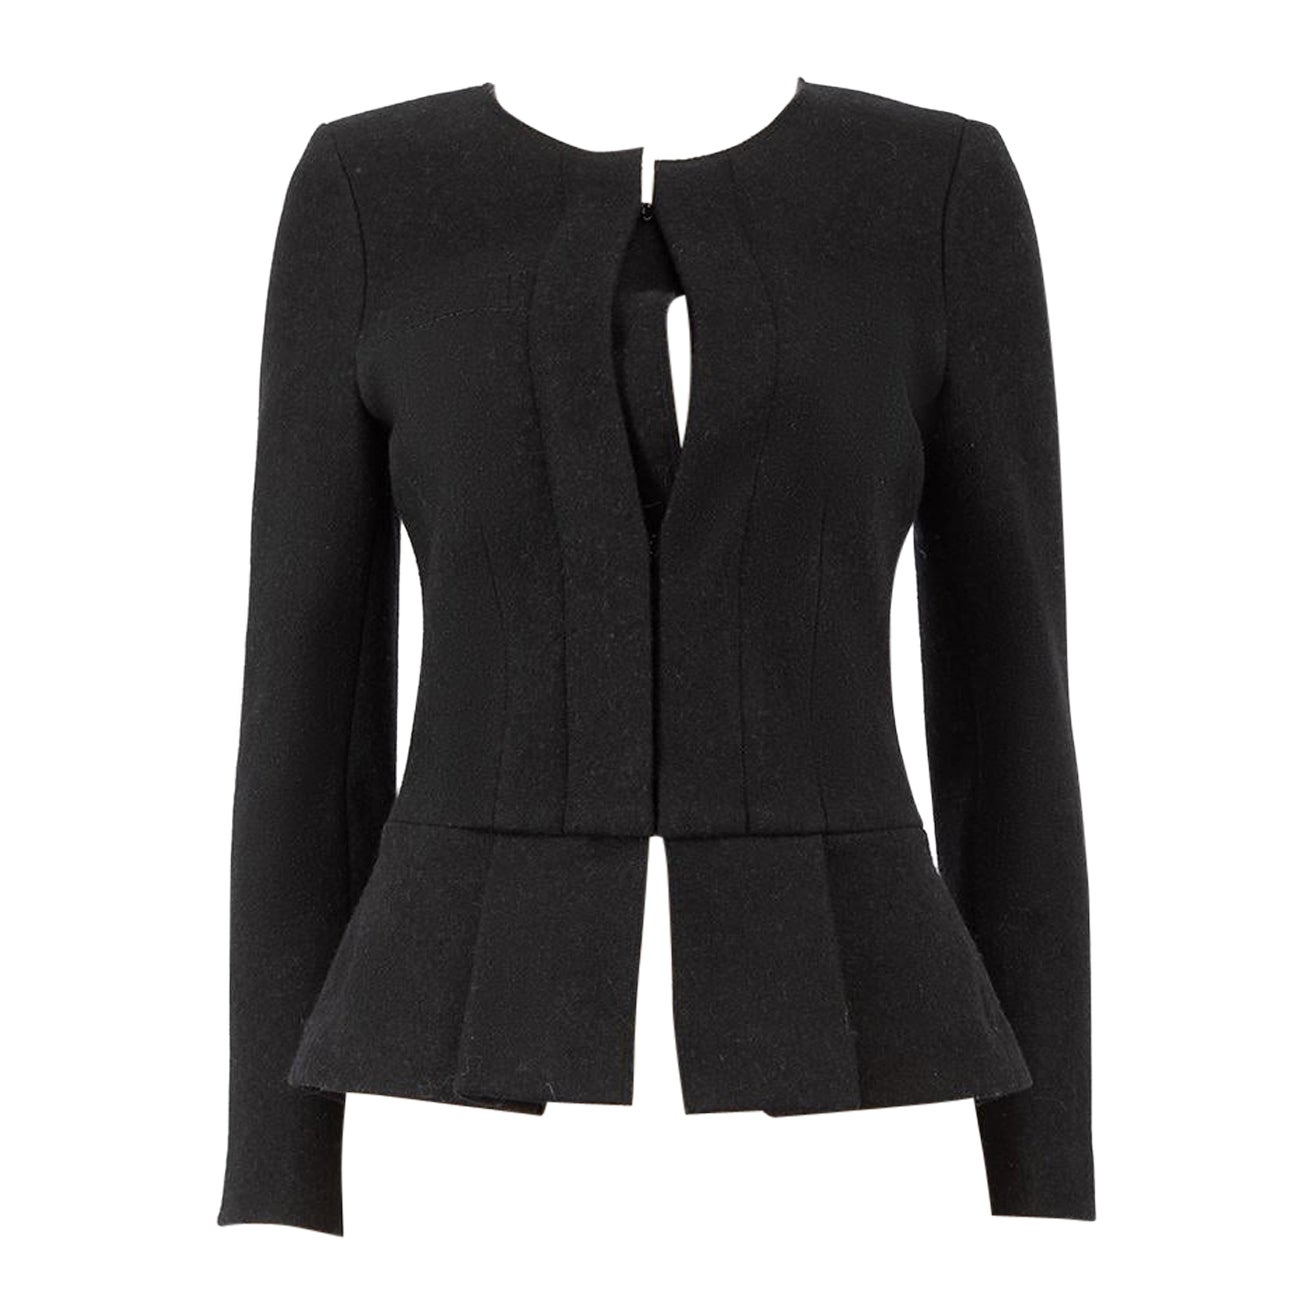 Isabel Marant Black Merino Wool Fitted Jacket Size S For Sale